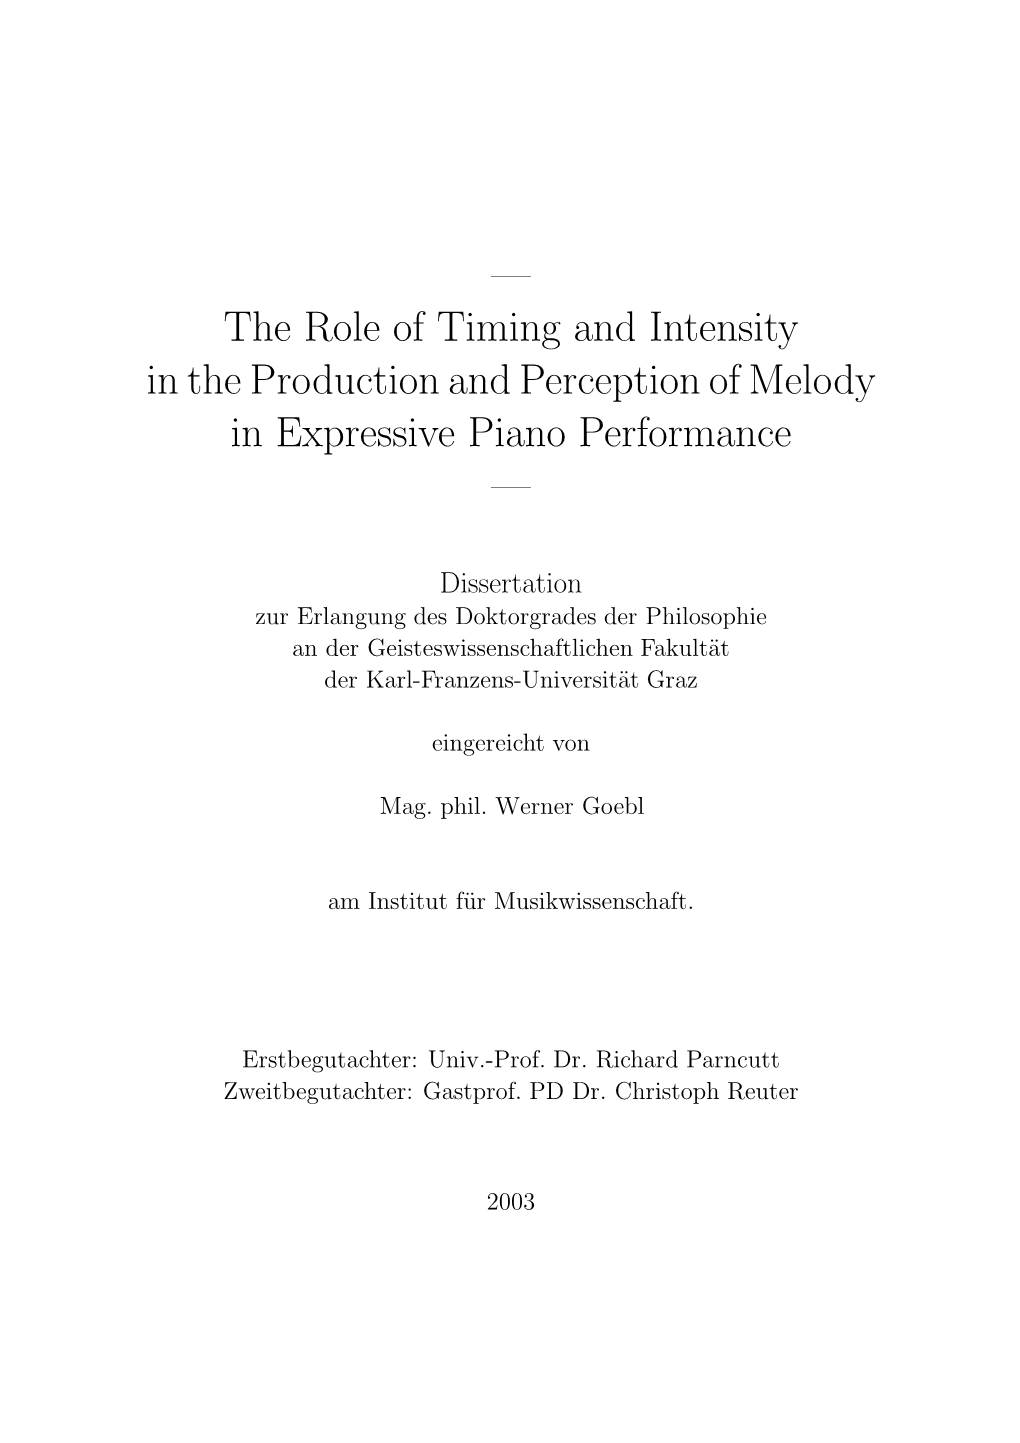 — the Role of Timing and Intensity in the Production and Perception of Melody in Expressive Piano Performance —